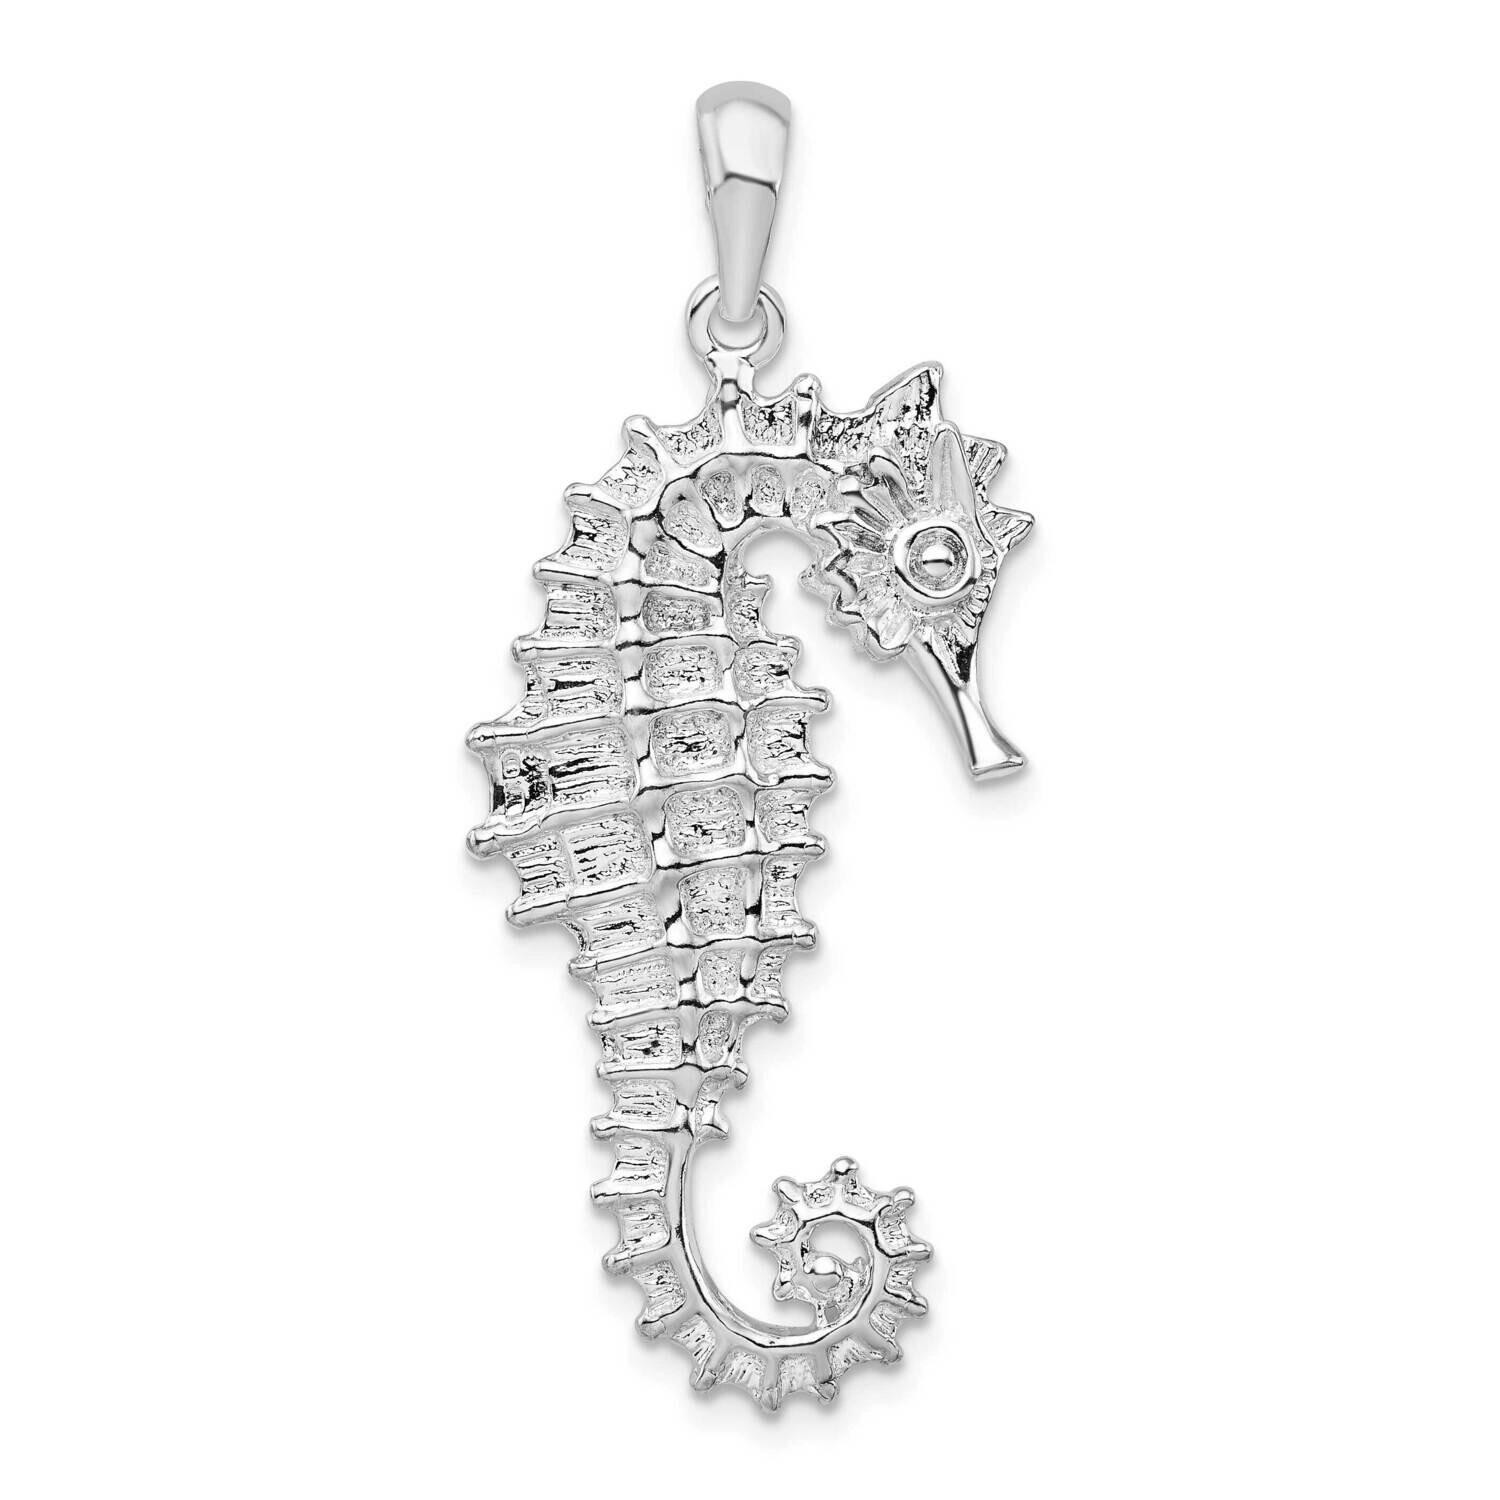 Textured 3D Seahorse Pendant Sterling Silver Polished QC9843